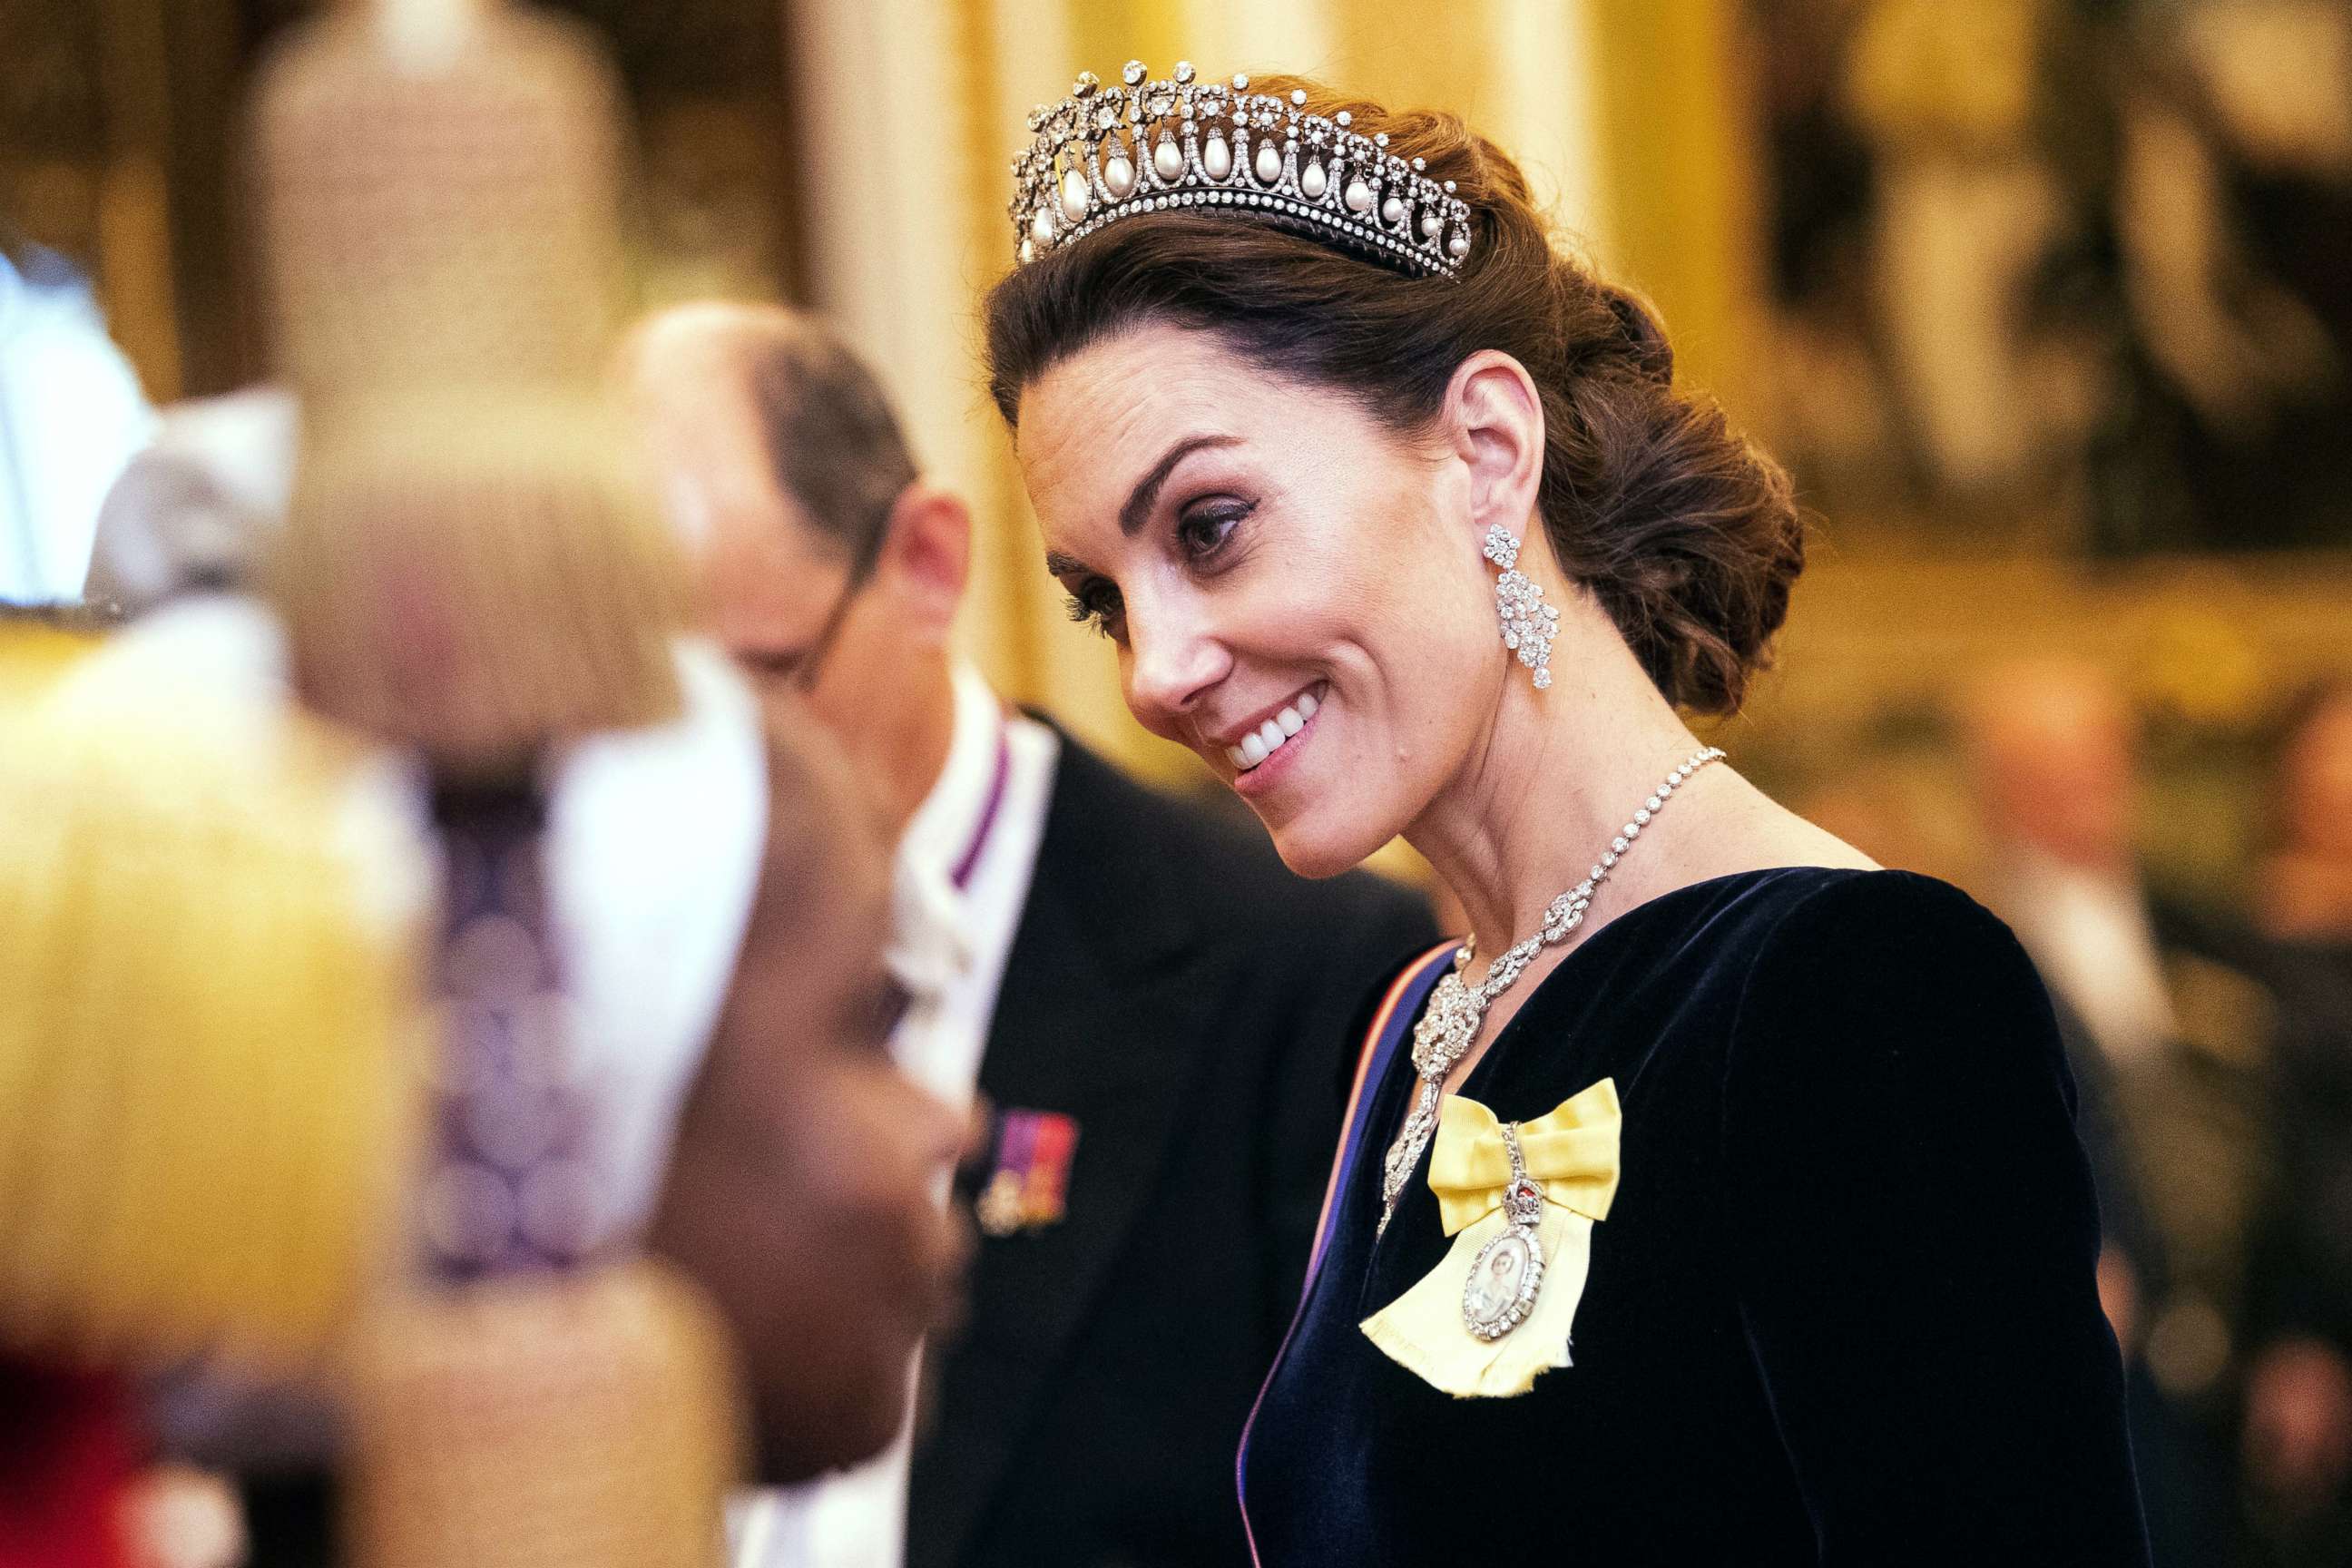 PHOTO: Catherine, Duchess of Cambridge talks to guests at an evening reception for members of the Diplomatic Corps at Buckingham Palace in London, Dec. 11, 2019.